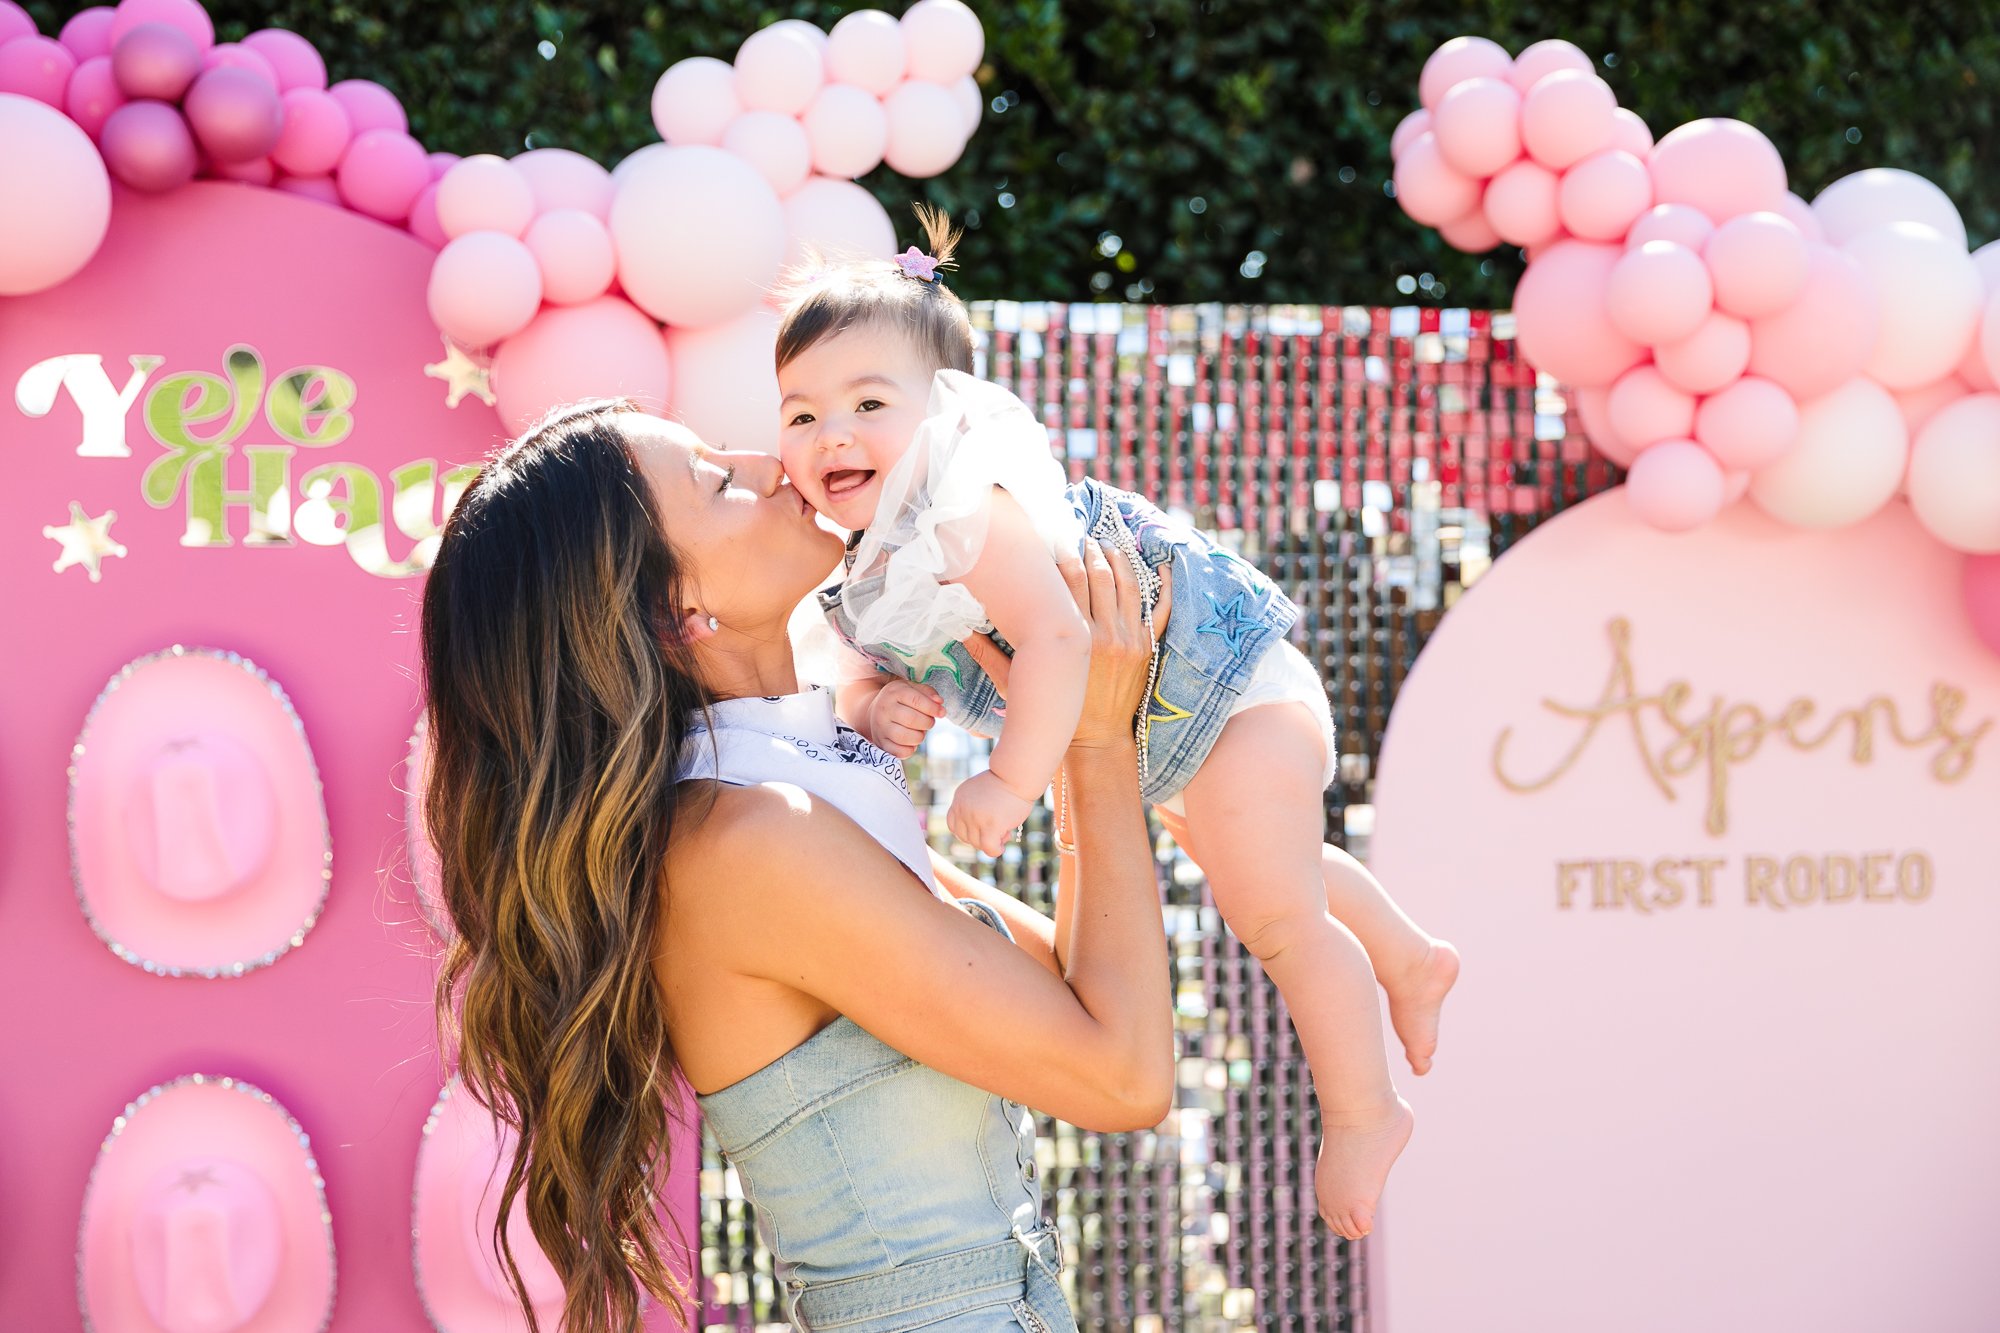 Los_Angeles_Party_Photographer_Luxury_Event_First_Birthday_Baby_Sherwood_Beverly_Hills_Cowboy_Disco_Theme_Girl_Child_Family_Photography-0093.jpg